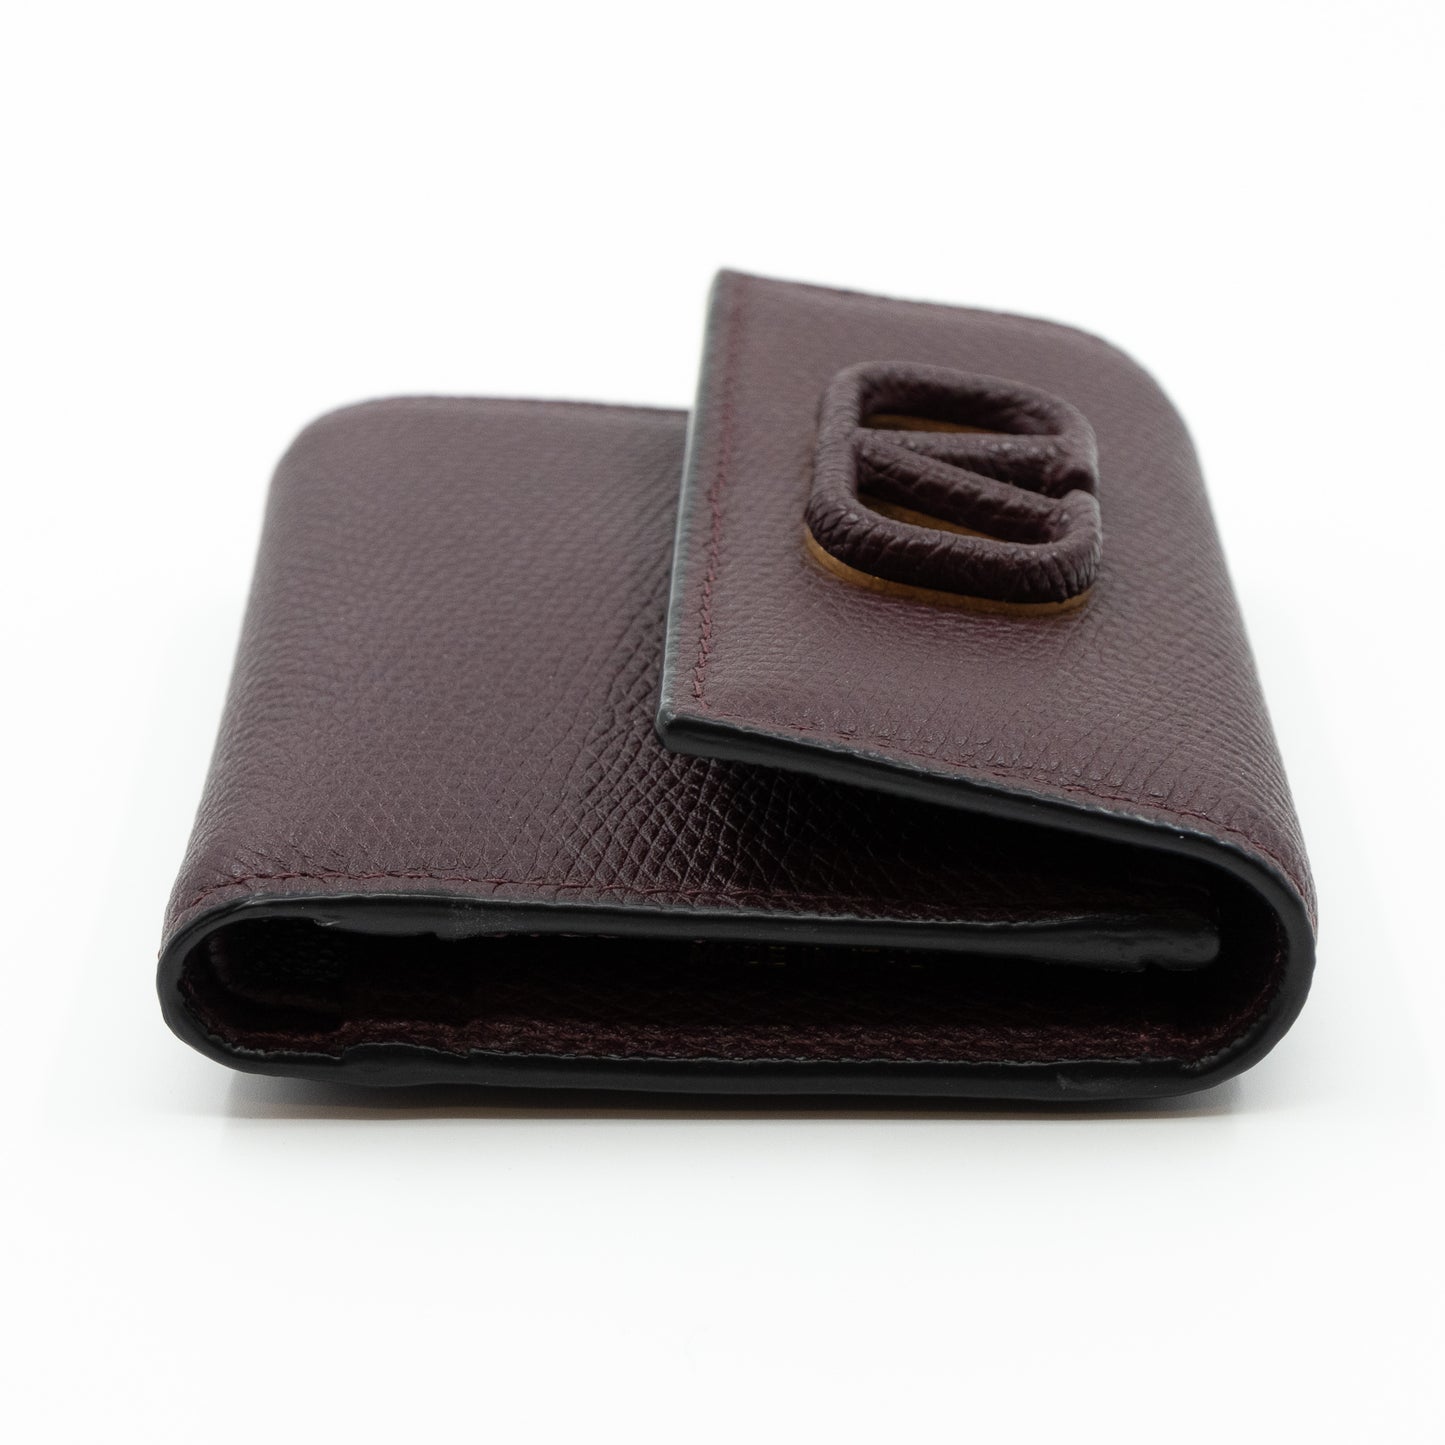 Small VSLING Wallet Burgundy Leather